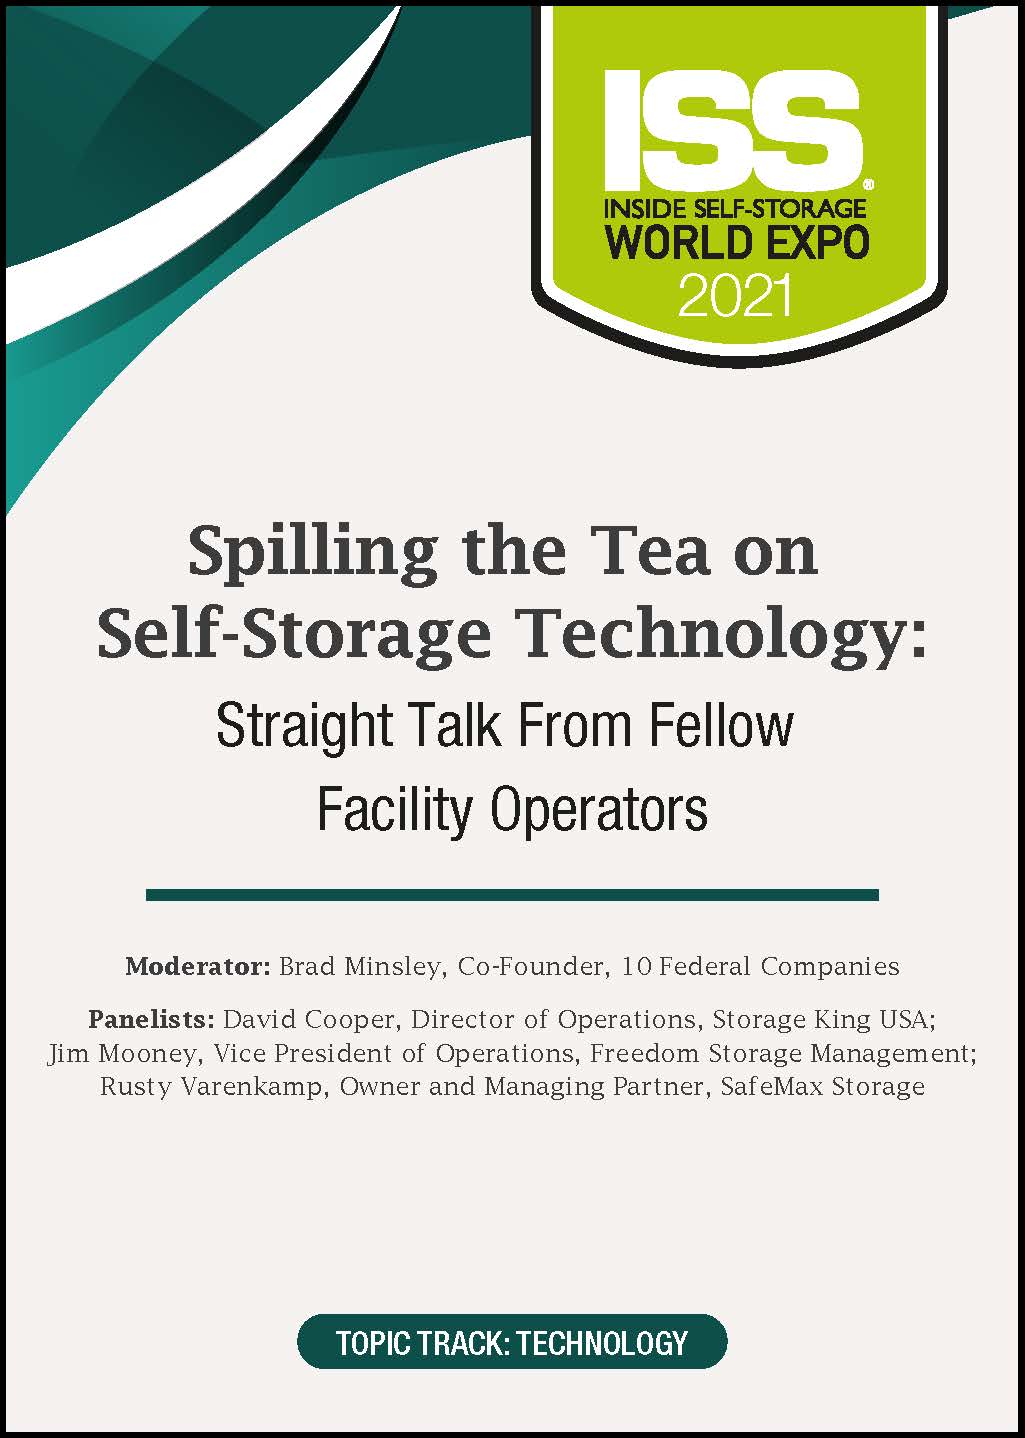 Spilling the Tea on Self-Storage Technology: Straight Talk From Fellow Facility Operators